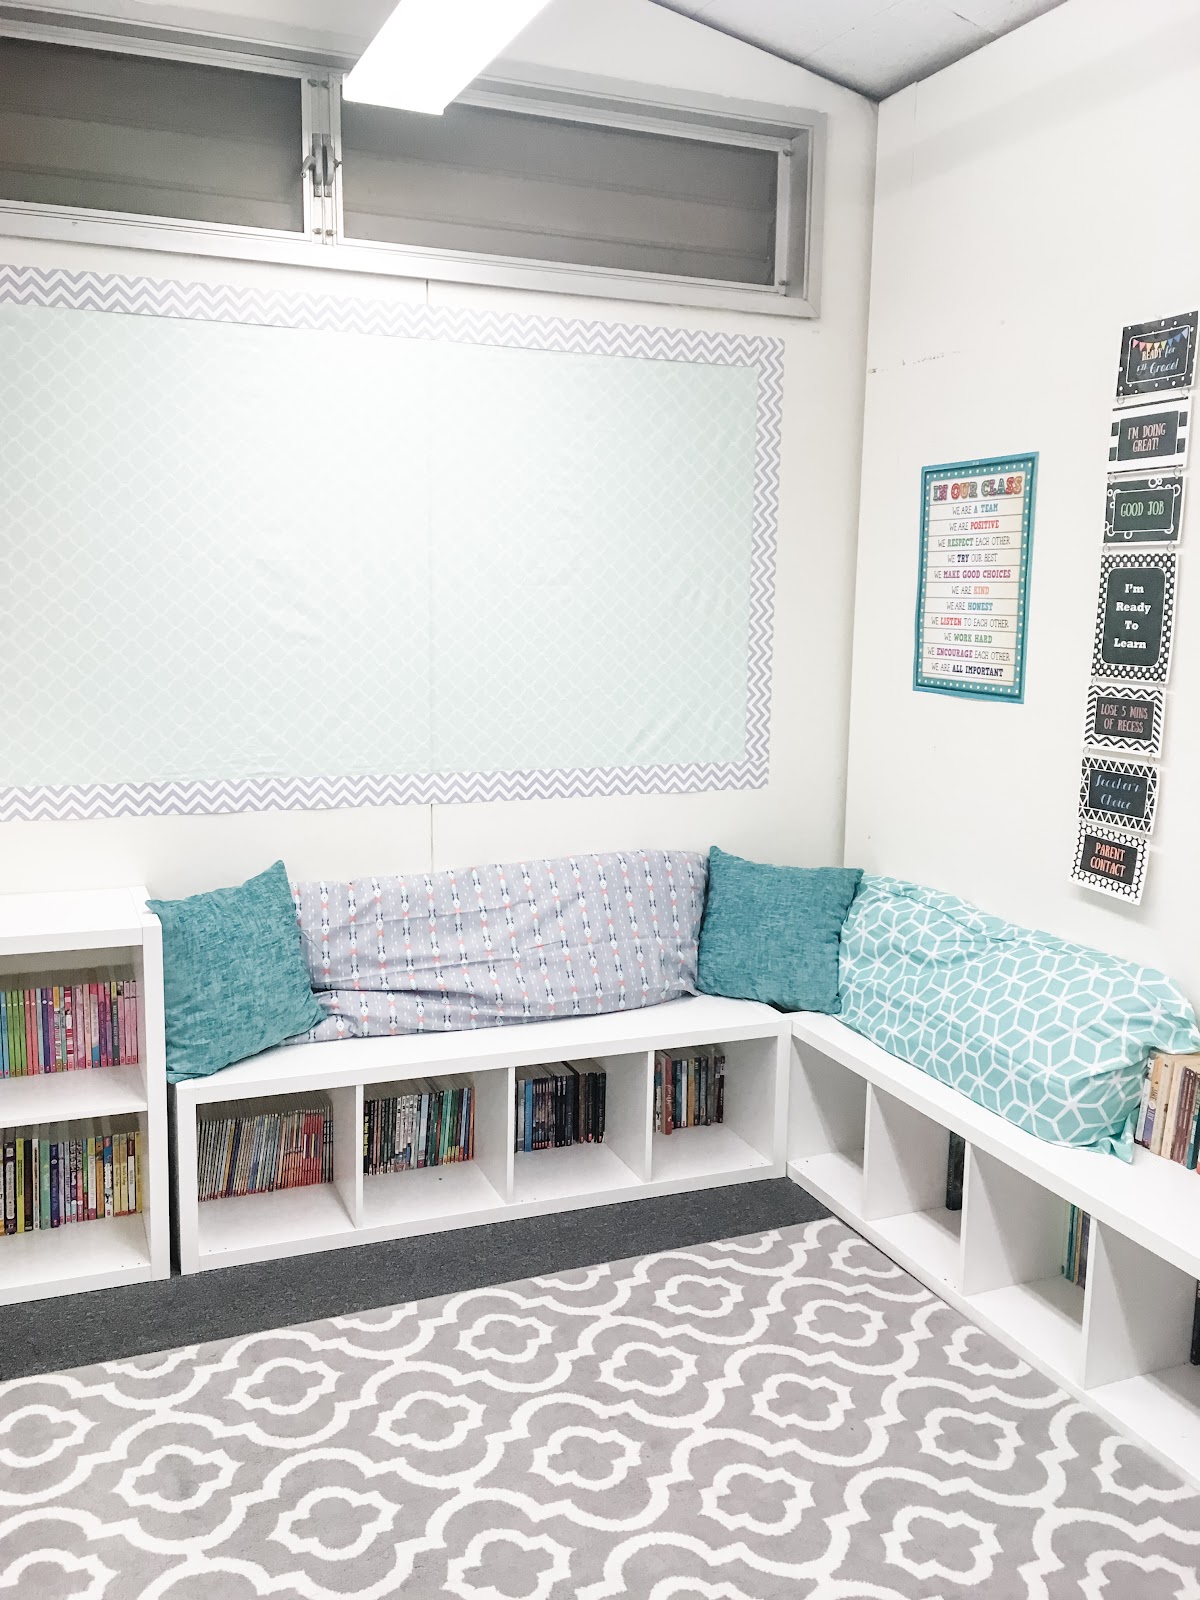 This image shows a closeup of a reading nook with low bookshelves that double as a bench. There are teal and gray pillows on top of the bench. 